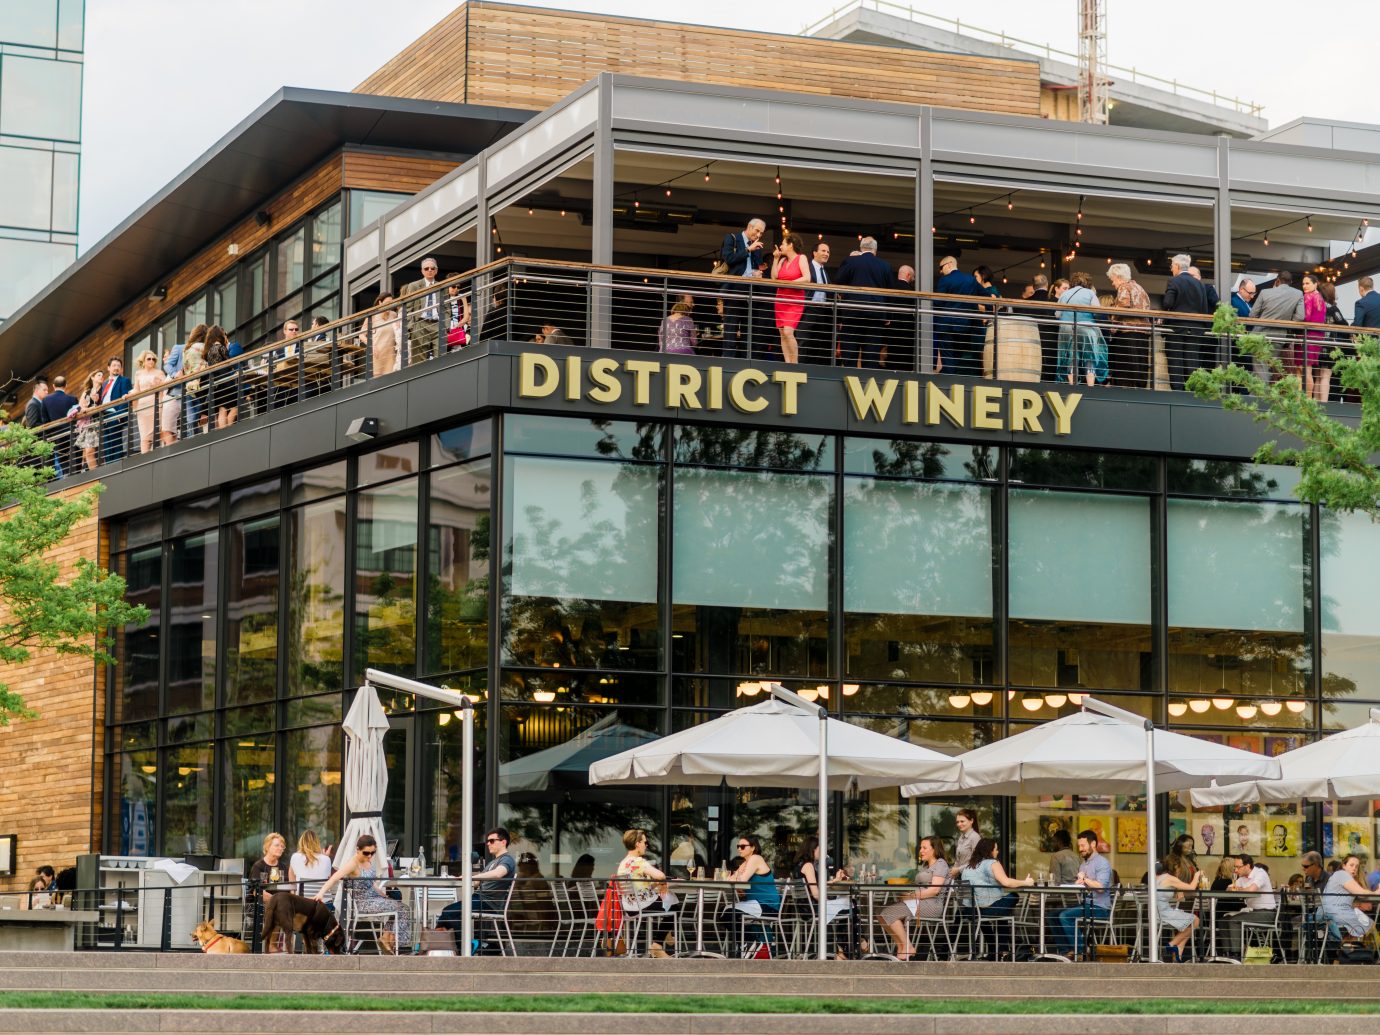 District Winery